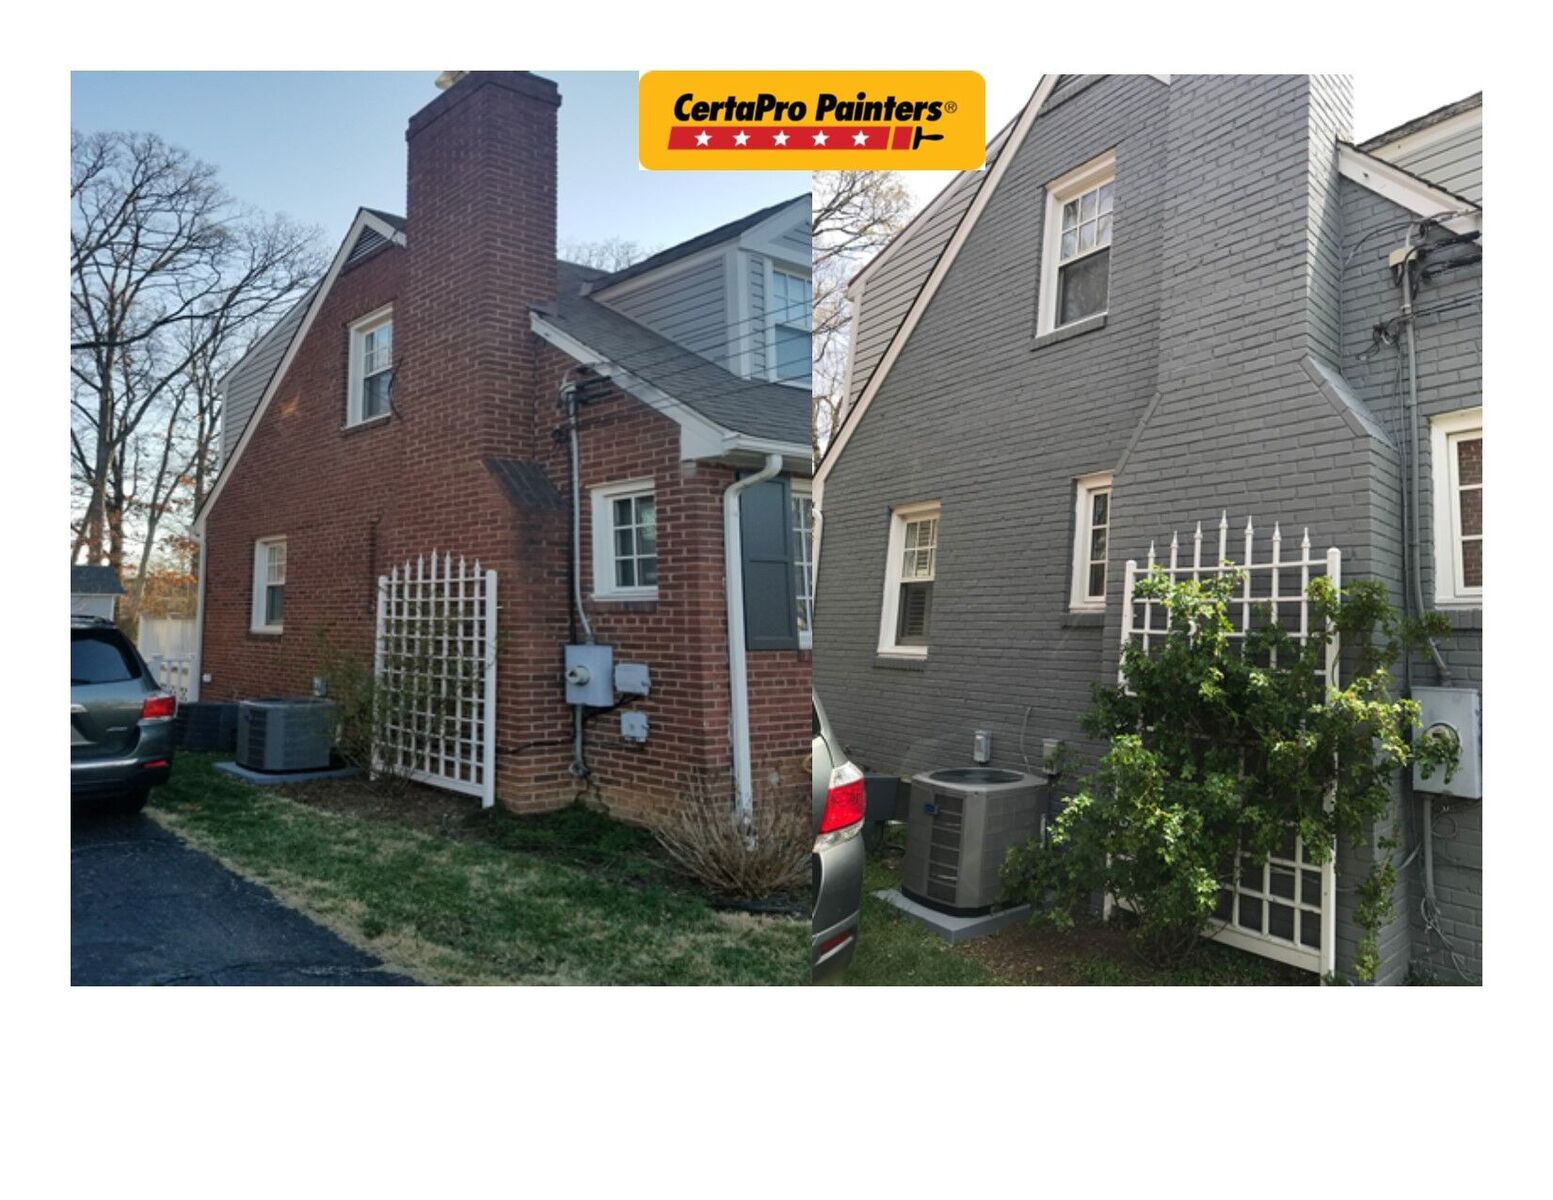 Exterior house painting before and after by CertaPro Painters in Alexandria, VA